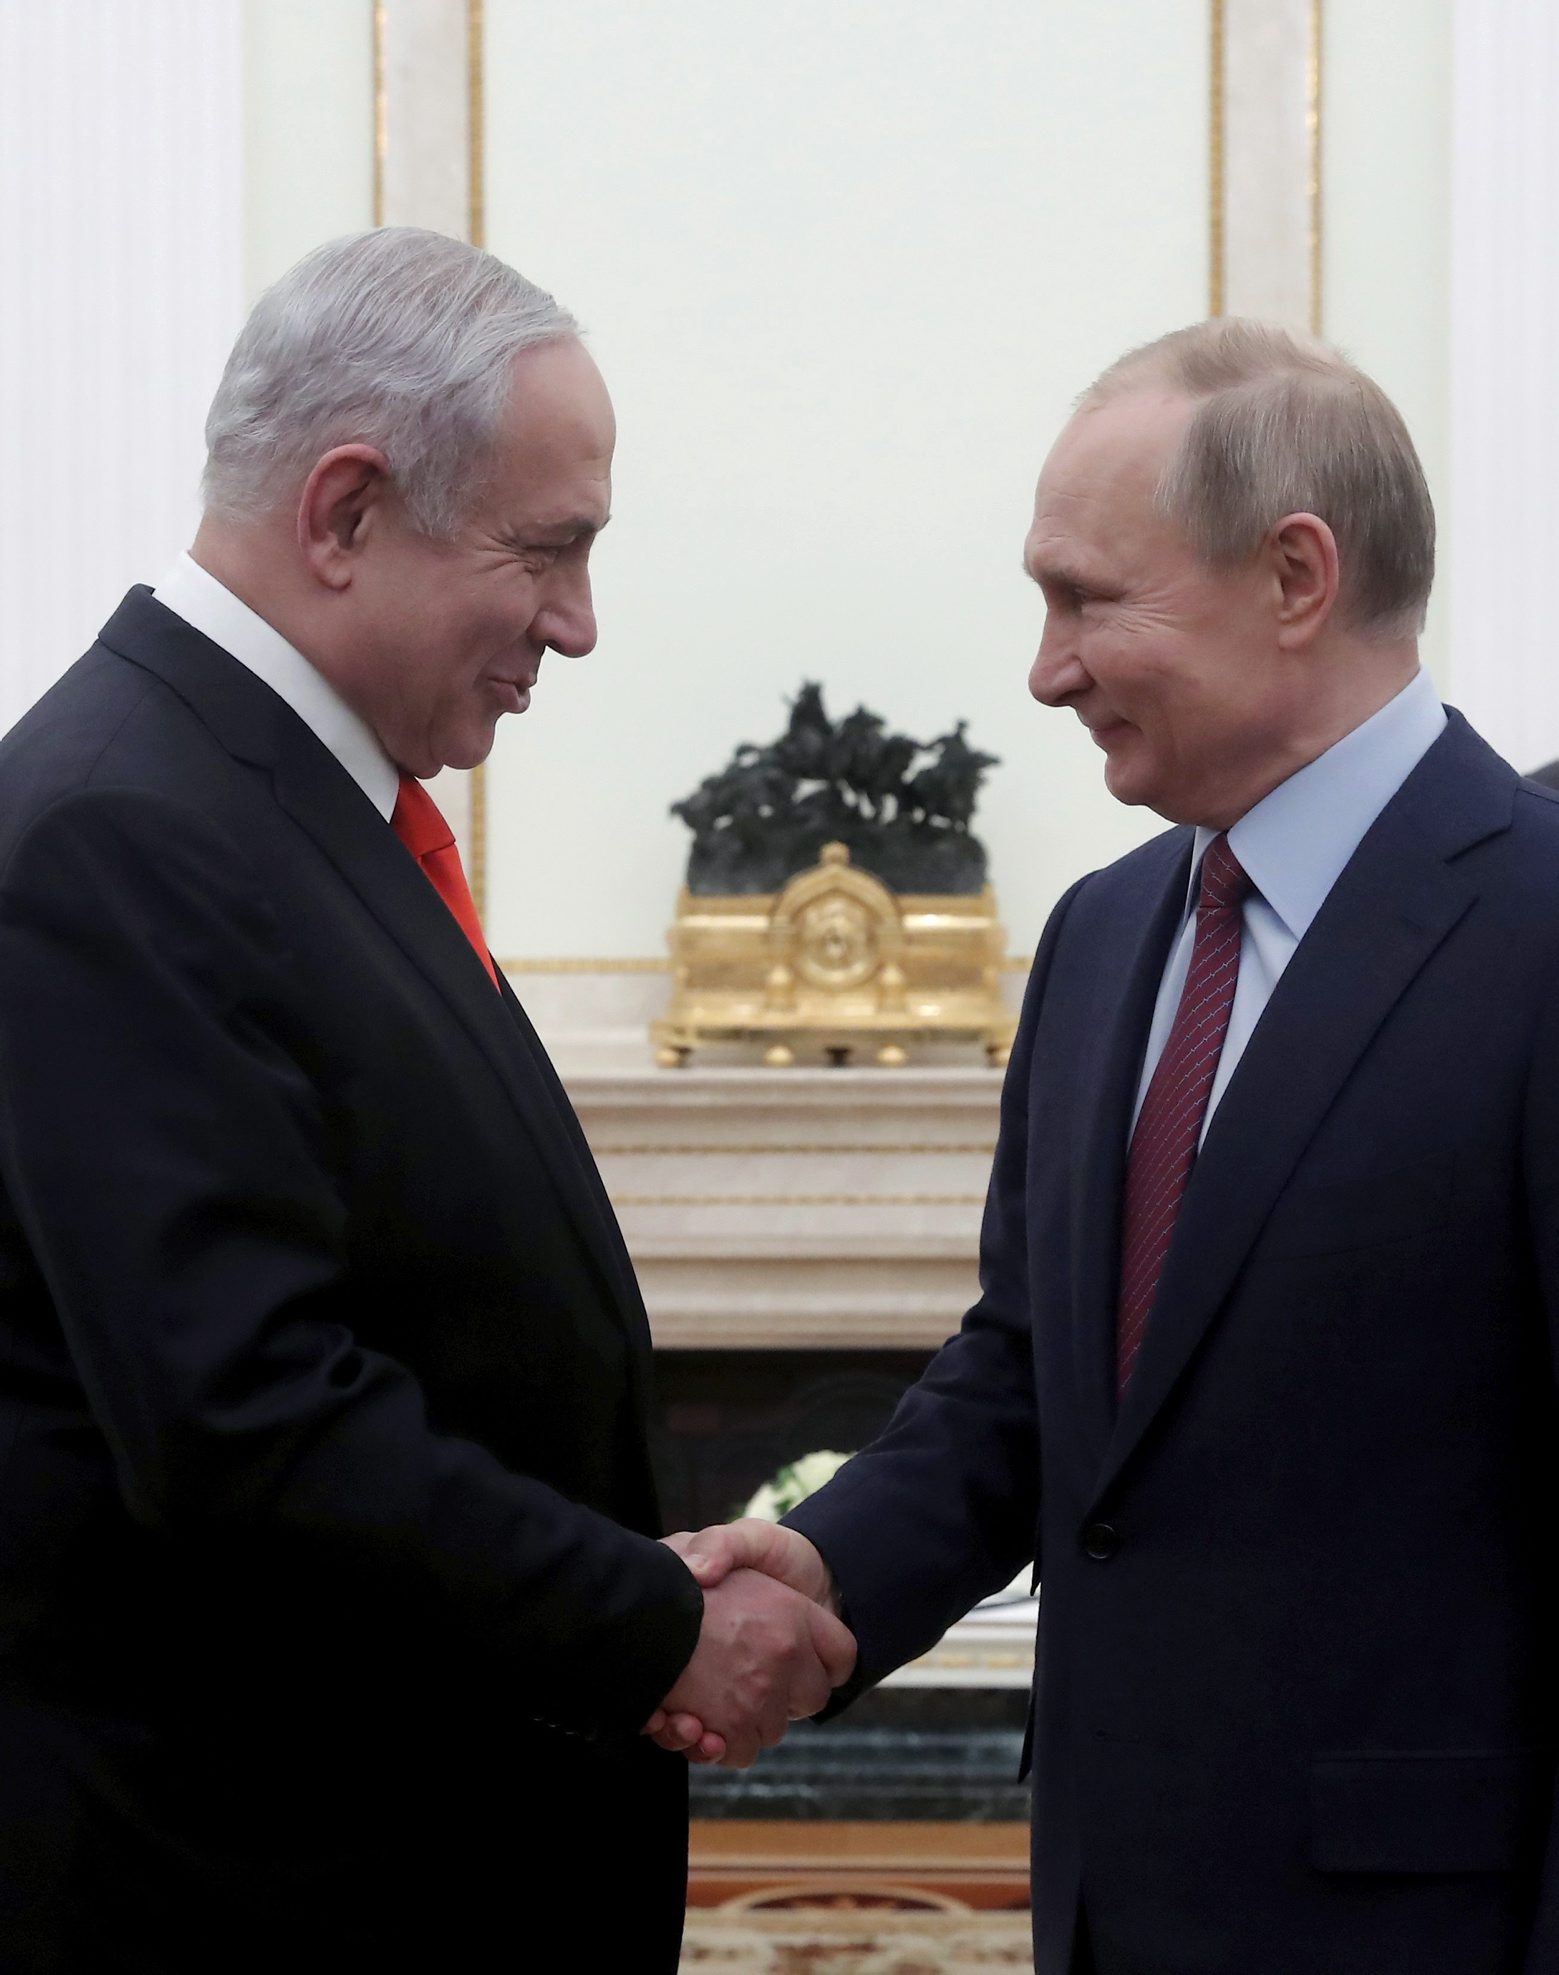 Russian President Vladimir Putin, right, shakes hands with Israeli Prime Minister Benjamin Netanyahu during their meeting in the Kremlin in Moscow, Russia, Thursday, Jan. 30, 2020. Netanyahu visited Moscow to discuss the U.S. Mideast peace plan with Putin and take an Israeli woman who had been jailed in Russia back home. (Maxim Shemetov/Pool Photo via AP) Russia Israel